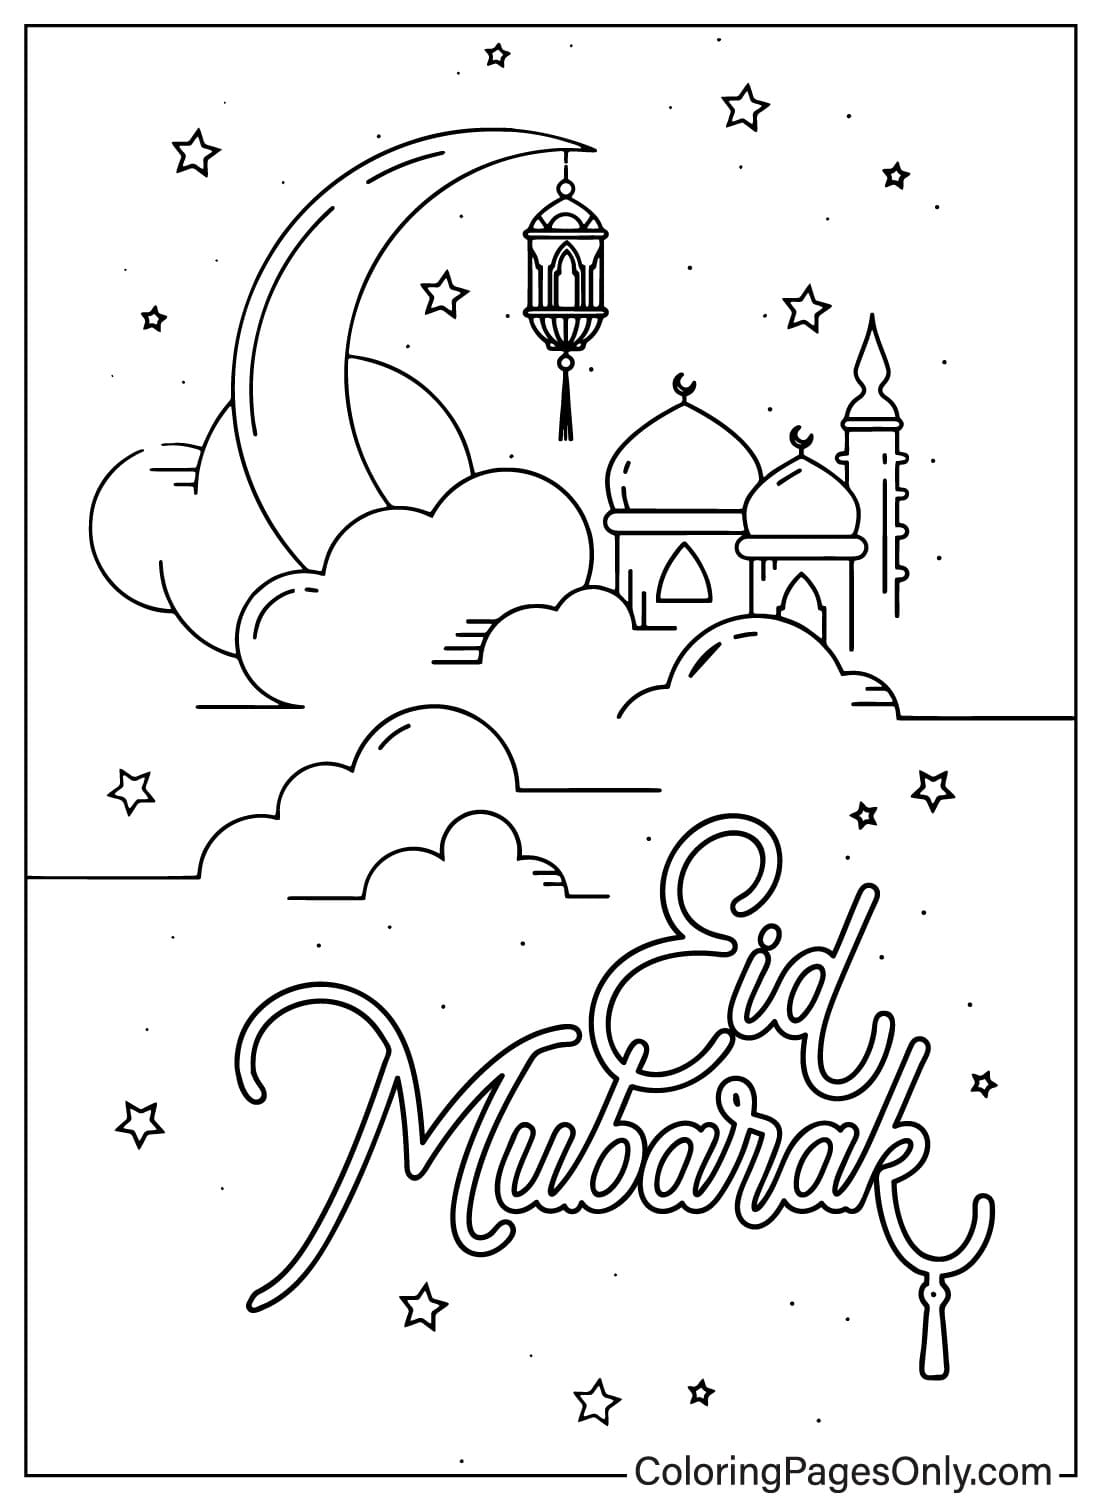 Eid Al-Fitr Picture to Color from Eid Al-Fitr